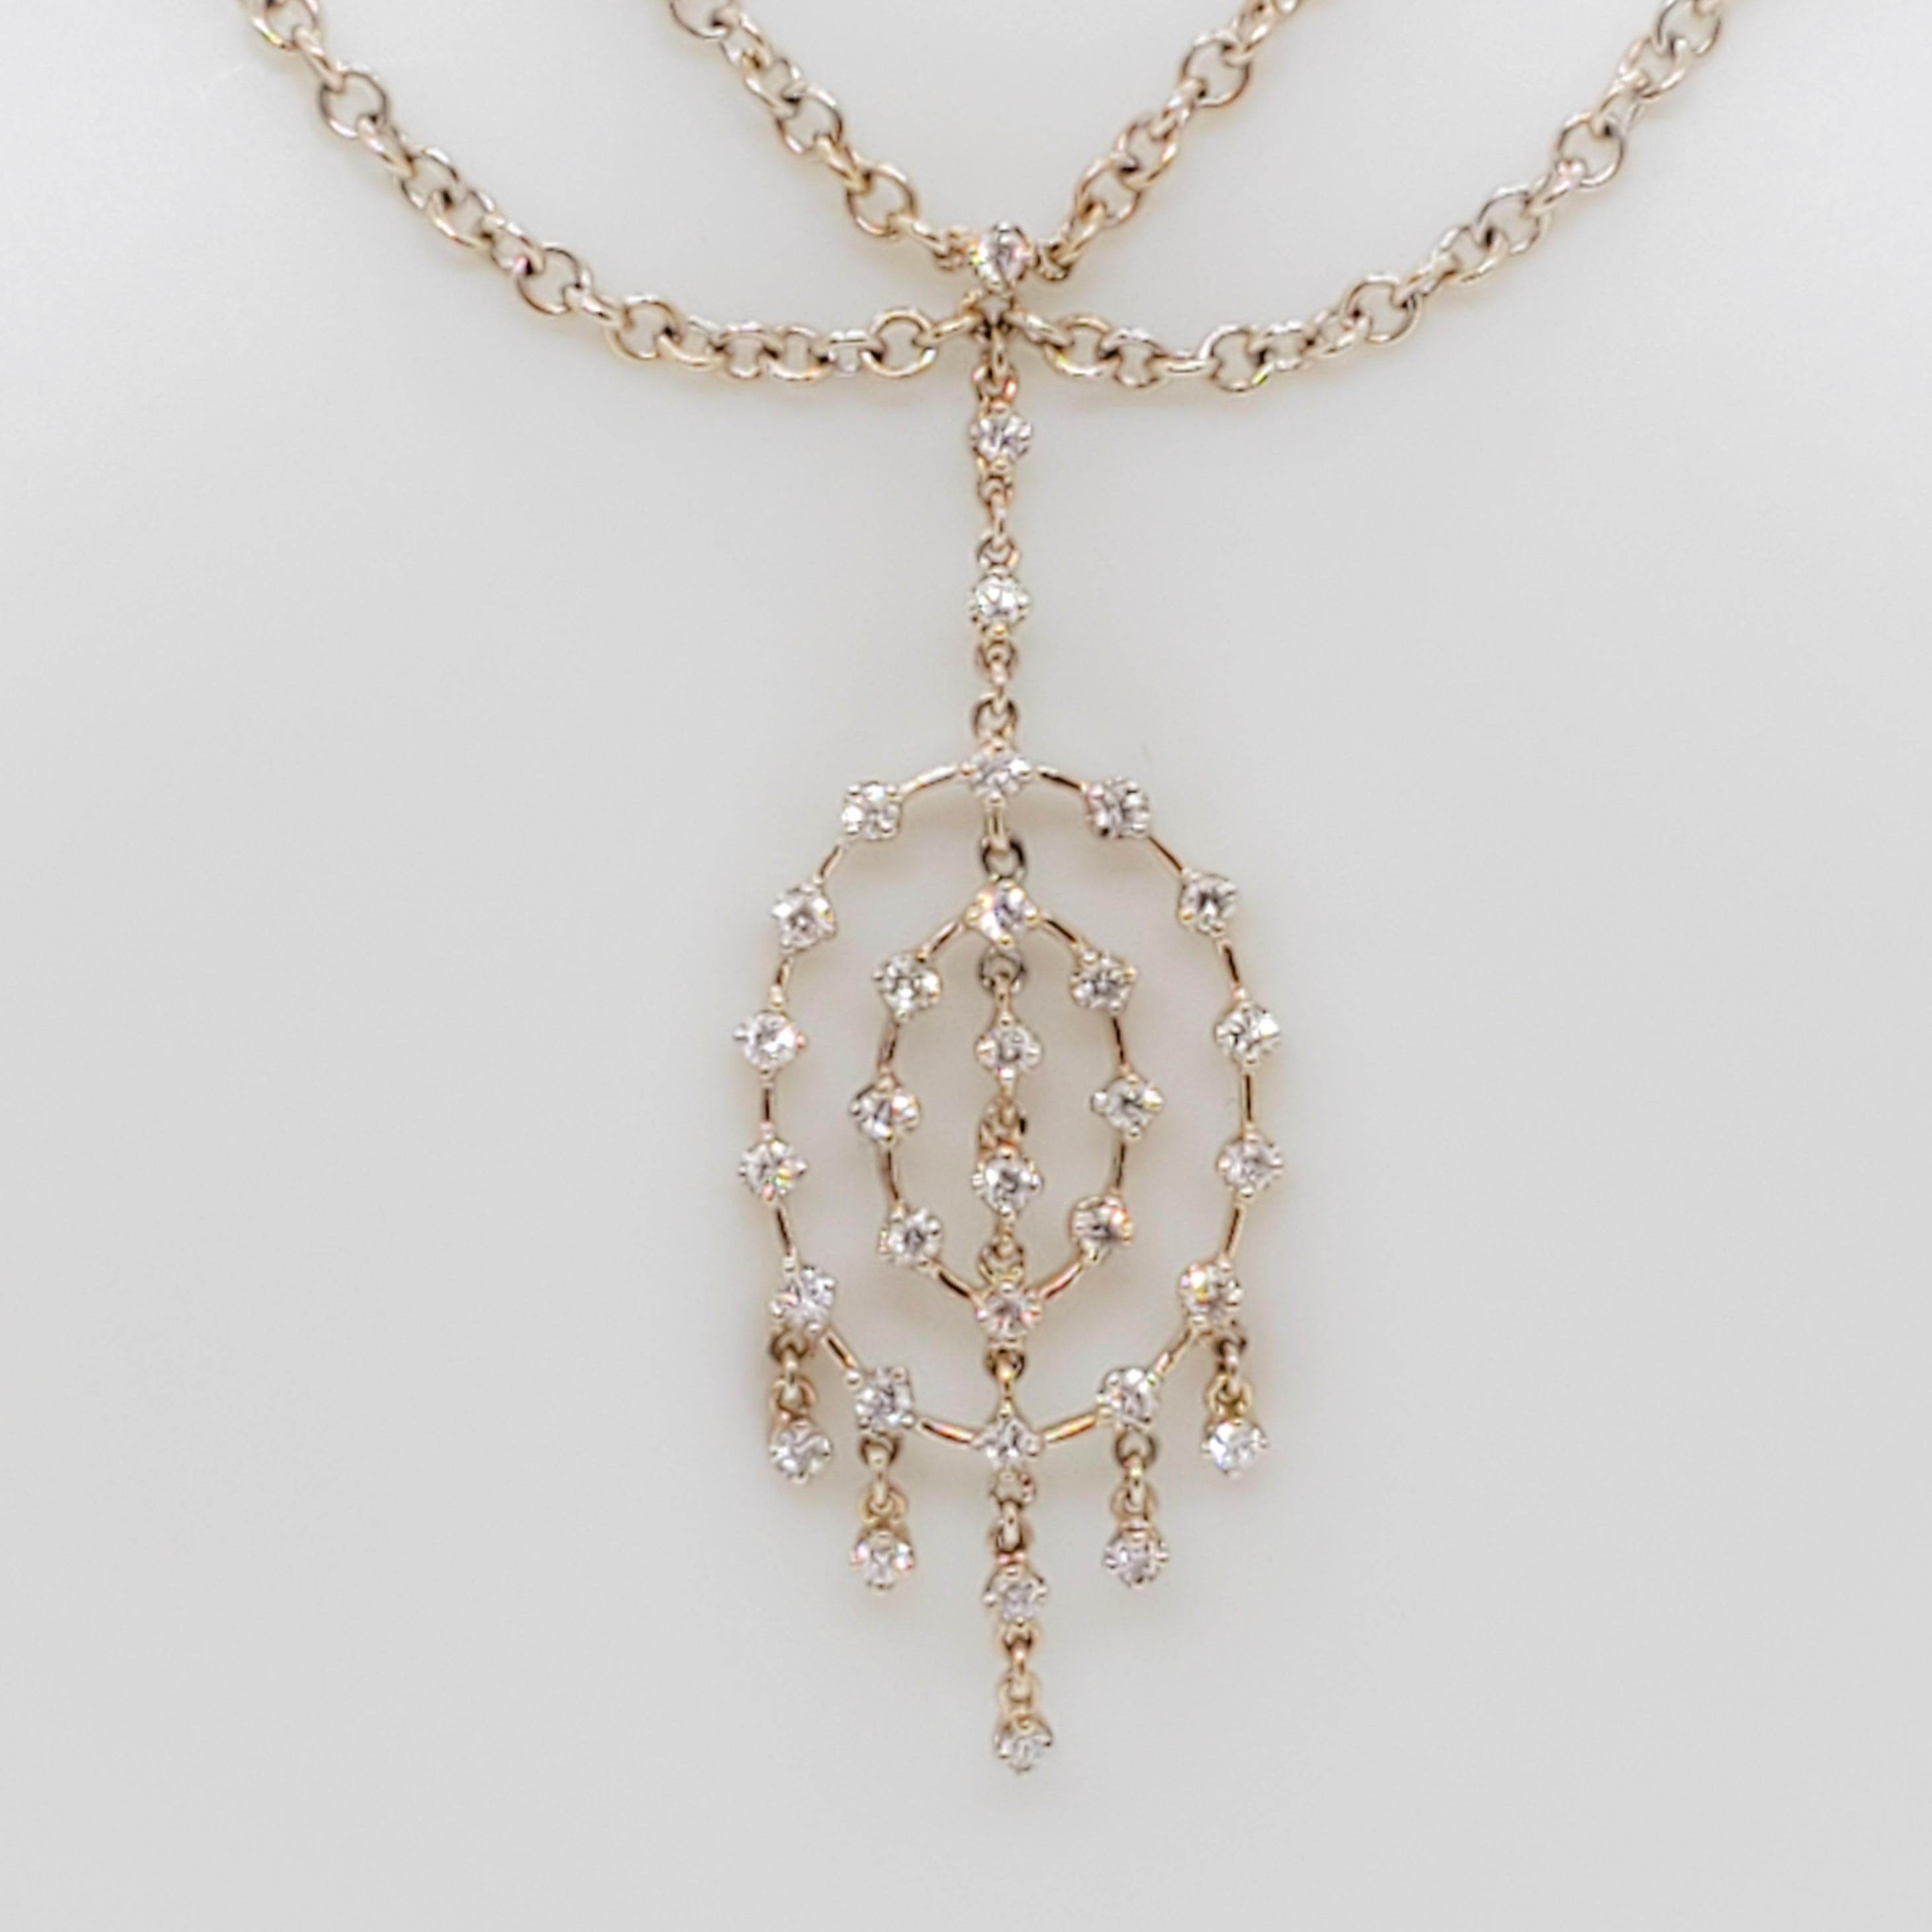 Beautiful H. Stern necklace with 0.40 ct. good quality white diamond rounds and multiple chains. Handmade in 18k yellow gold.